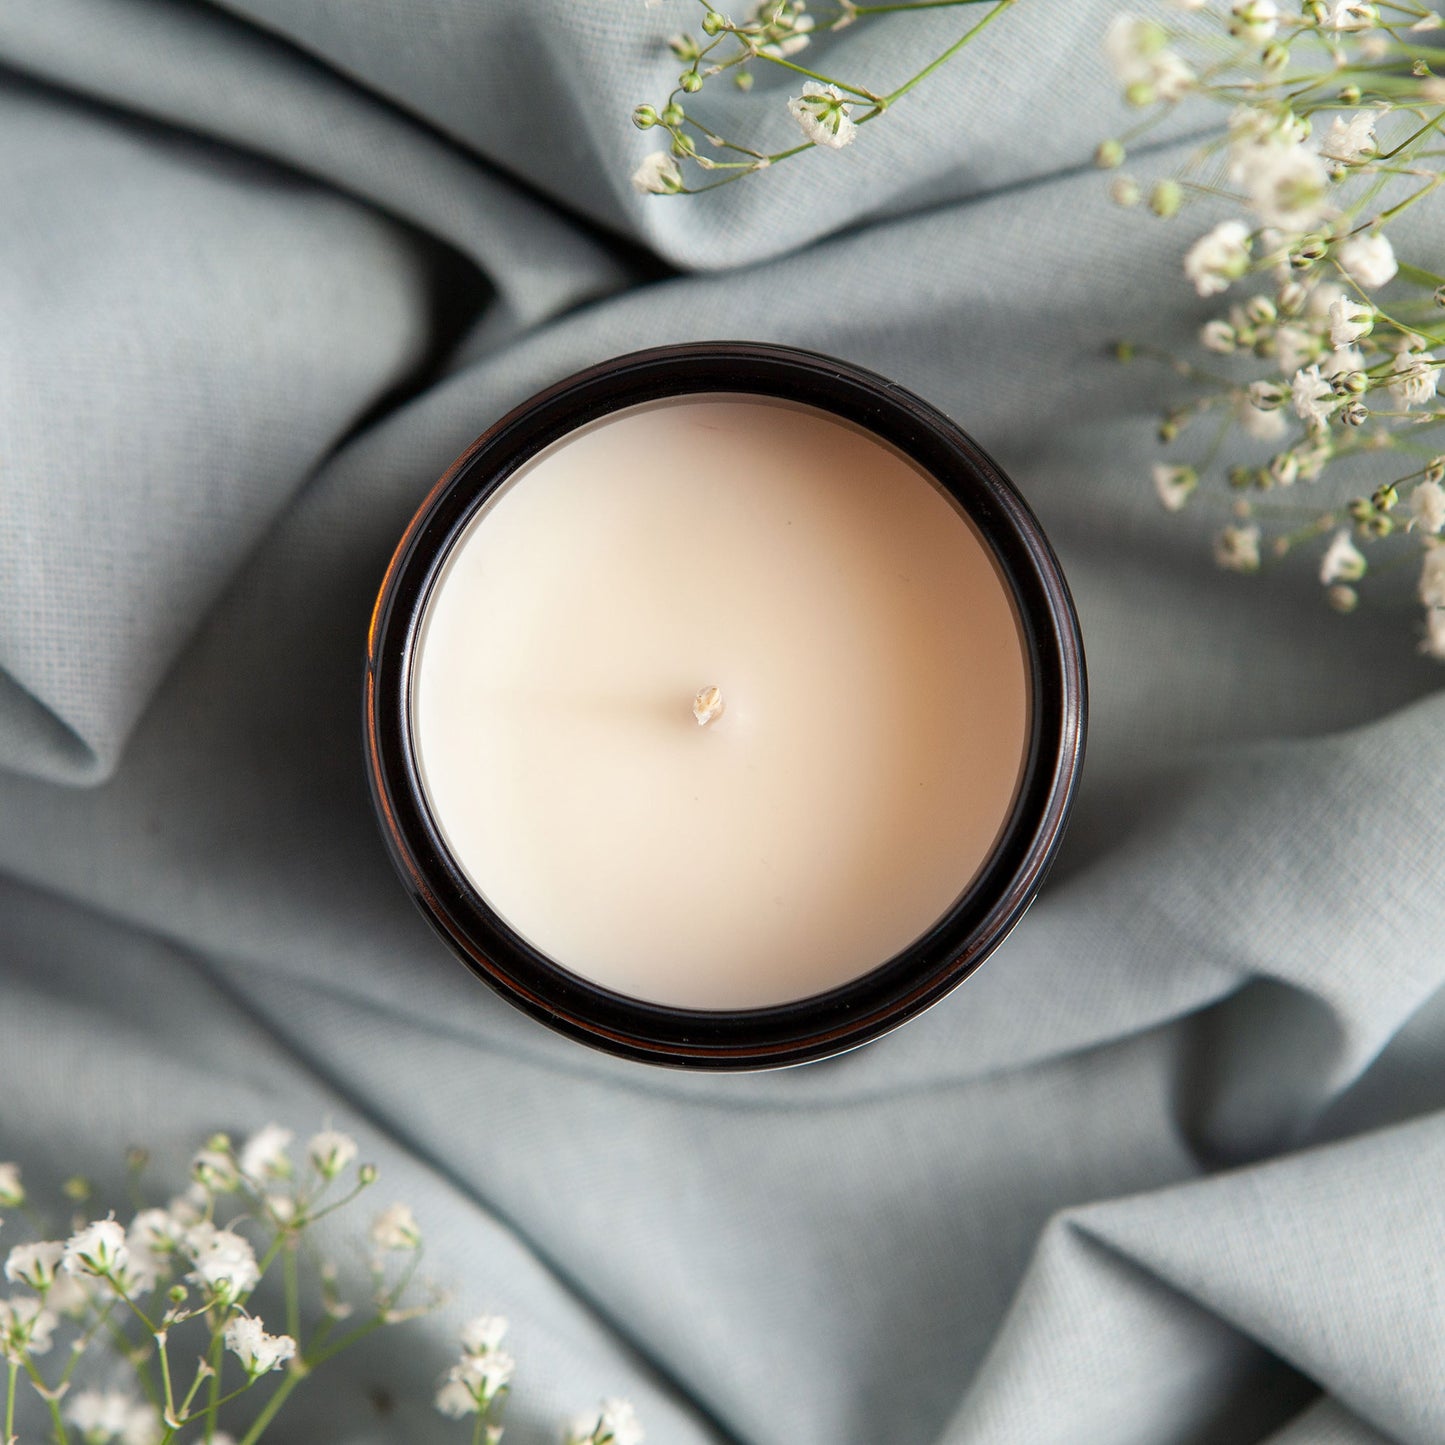 Thank You Gift Scented Candle - Kindred Fires